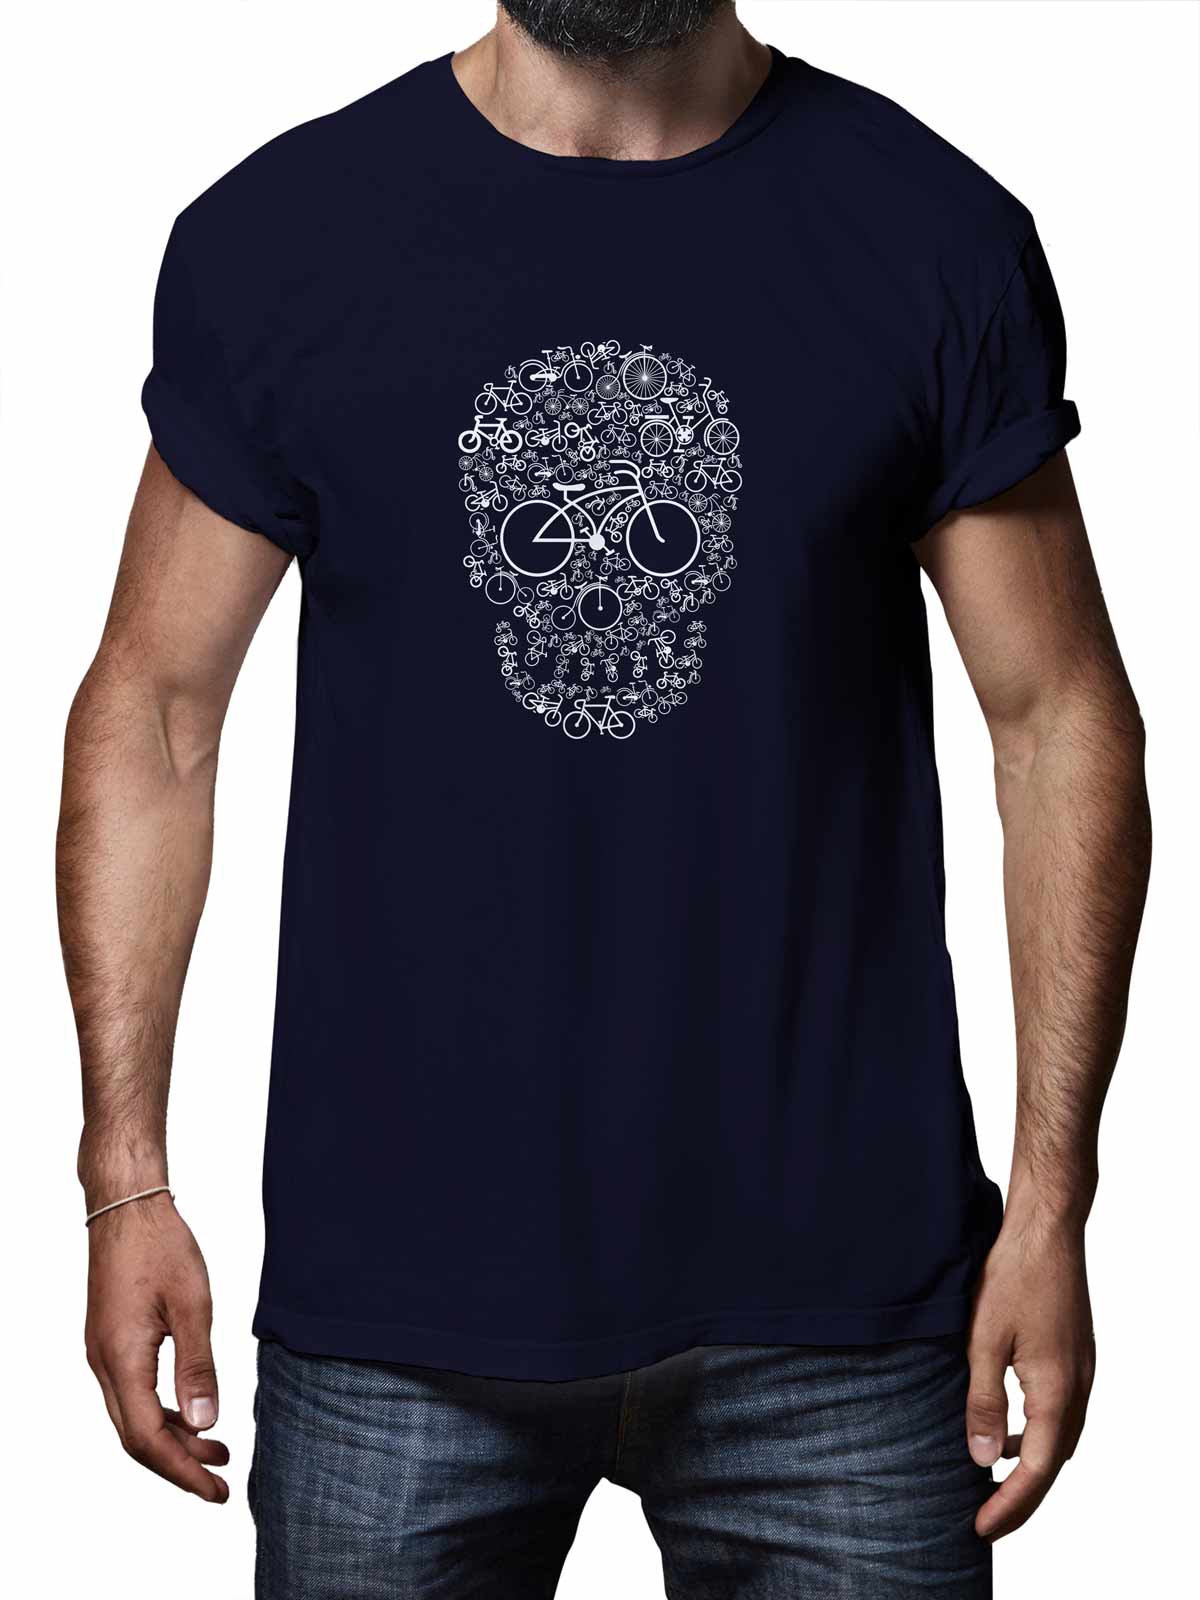 Cycle-head-printed-t-shirt-for-men by Ghumakkad